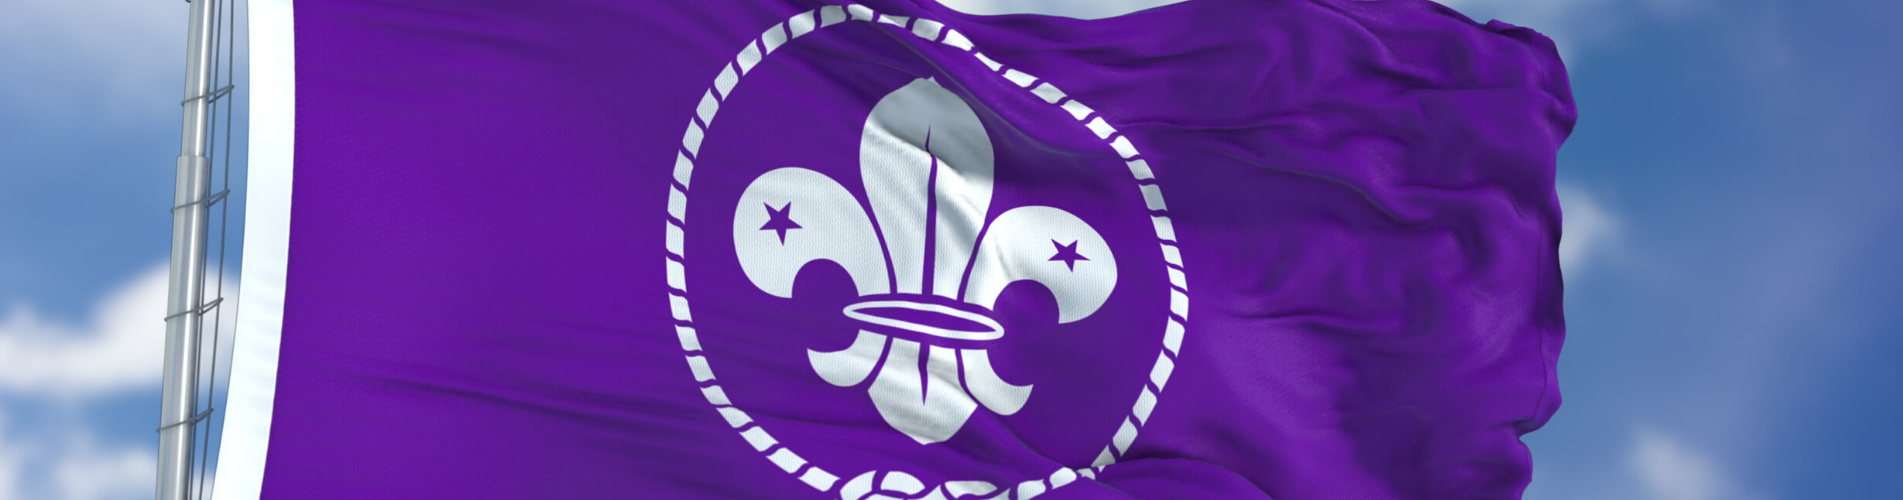 Scouts flag